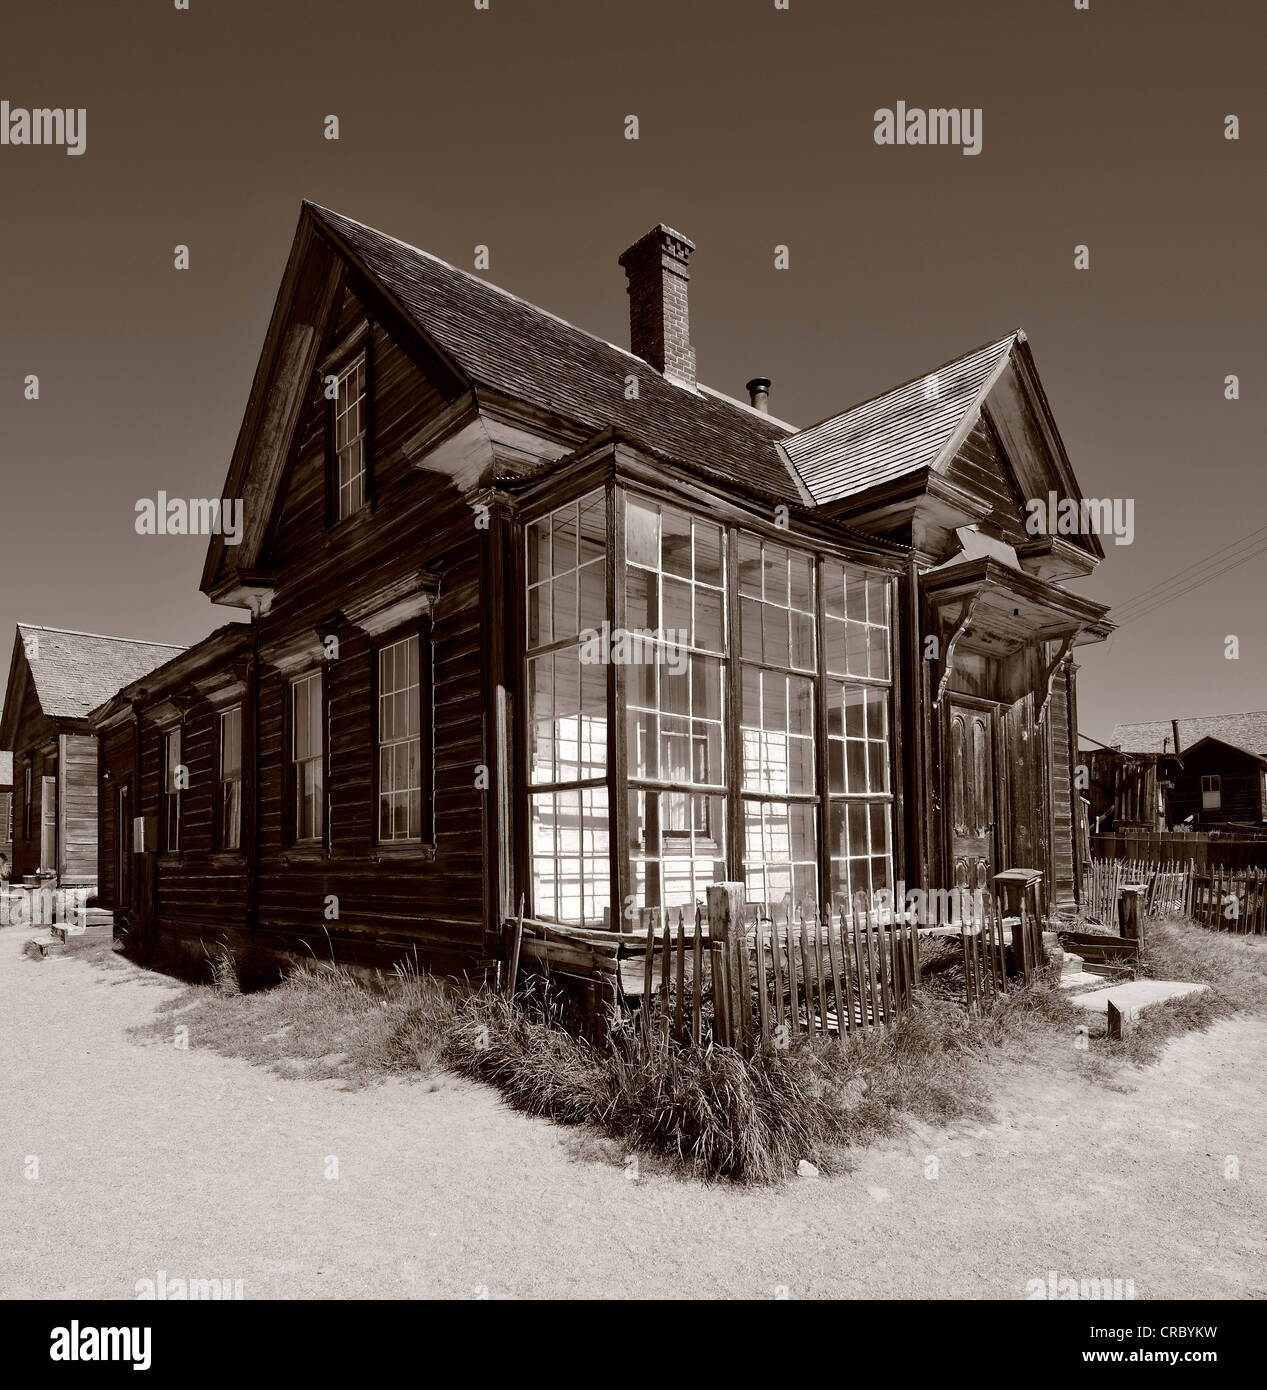 Residence of a wealthy citizen, James Stuart Cain, ghost town of Bodie, a former gold mining town, Bodie State Historic Park Stock Photo